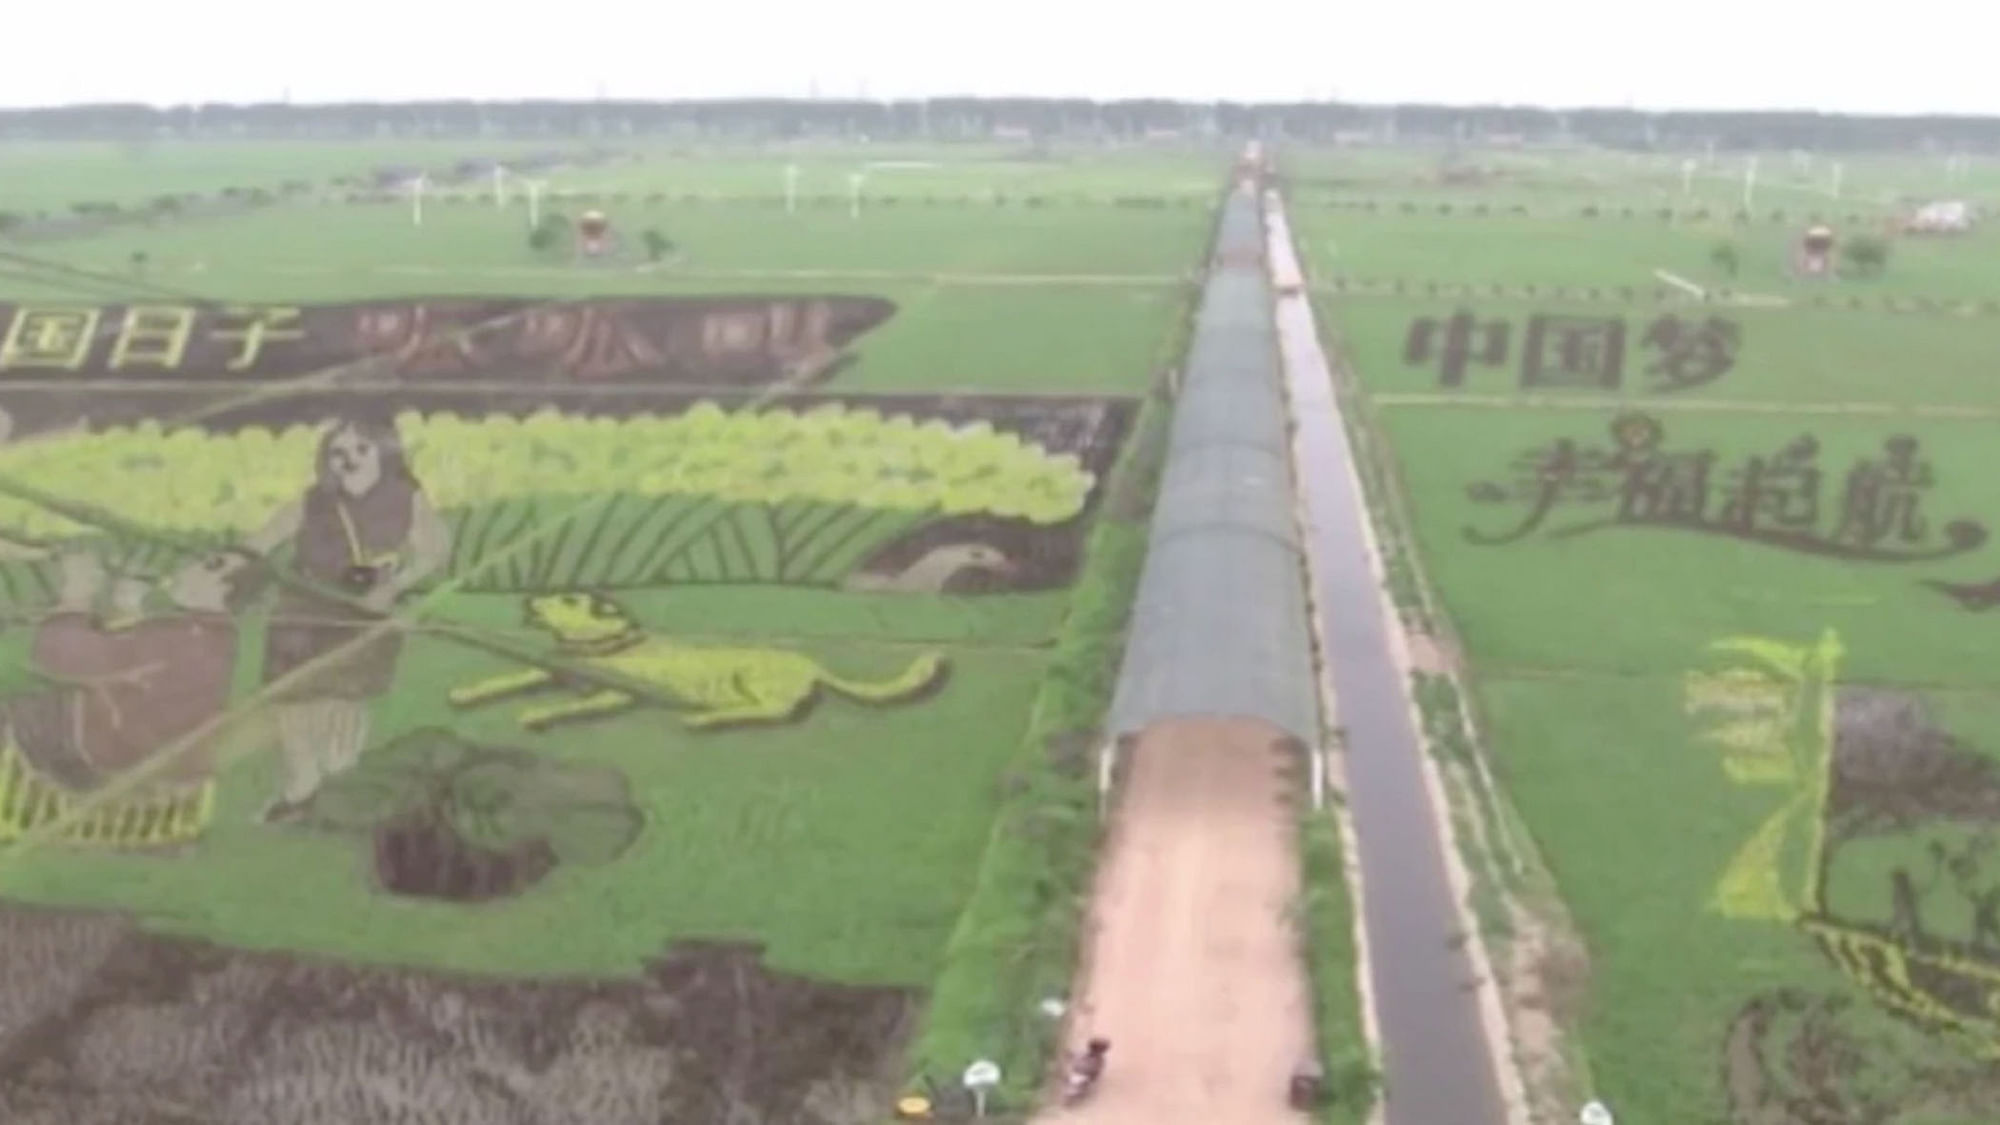 Chinese farmers have created elaborate 3D artworks in their paddy fields. (Photo: AP screen grab)